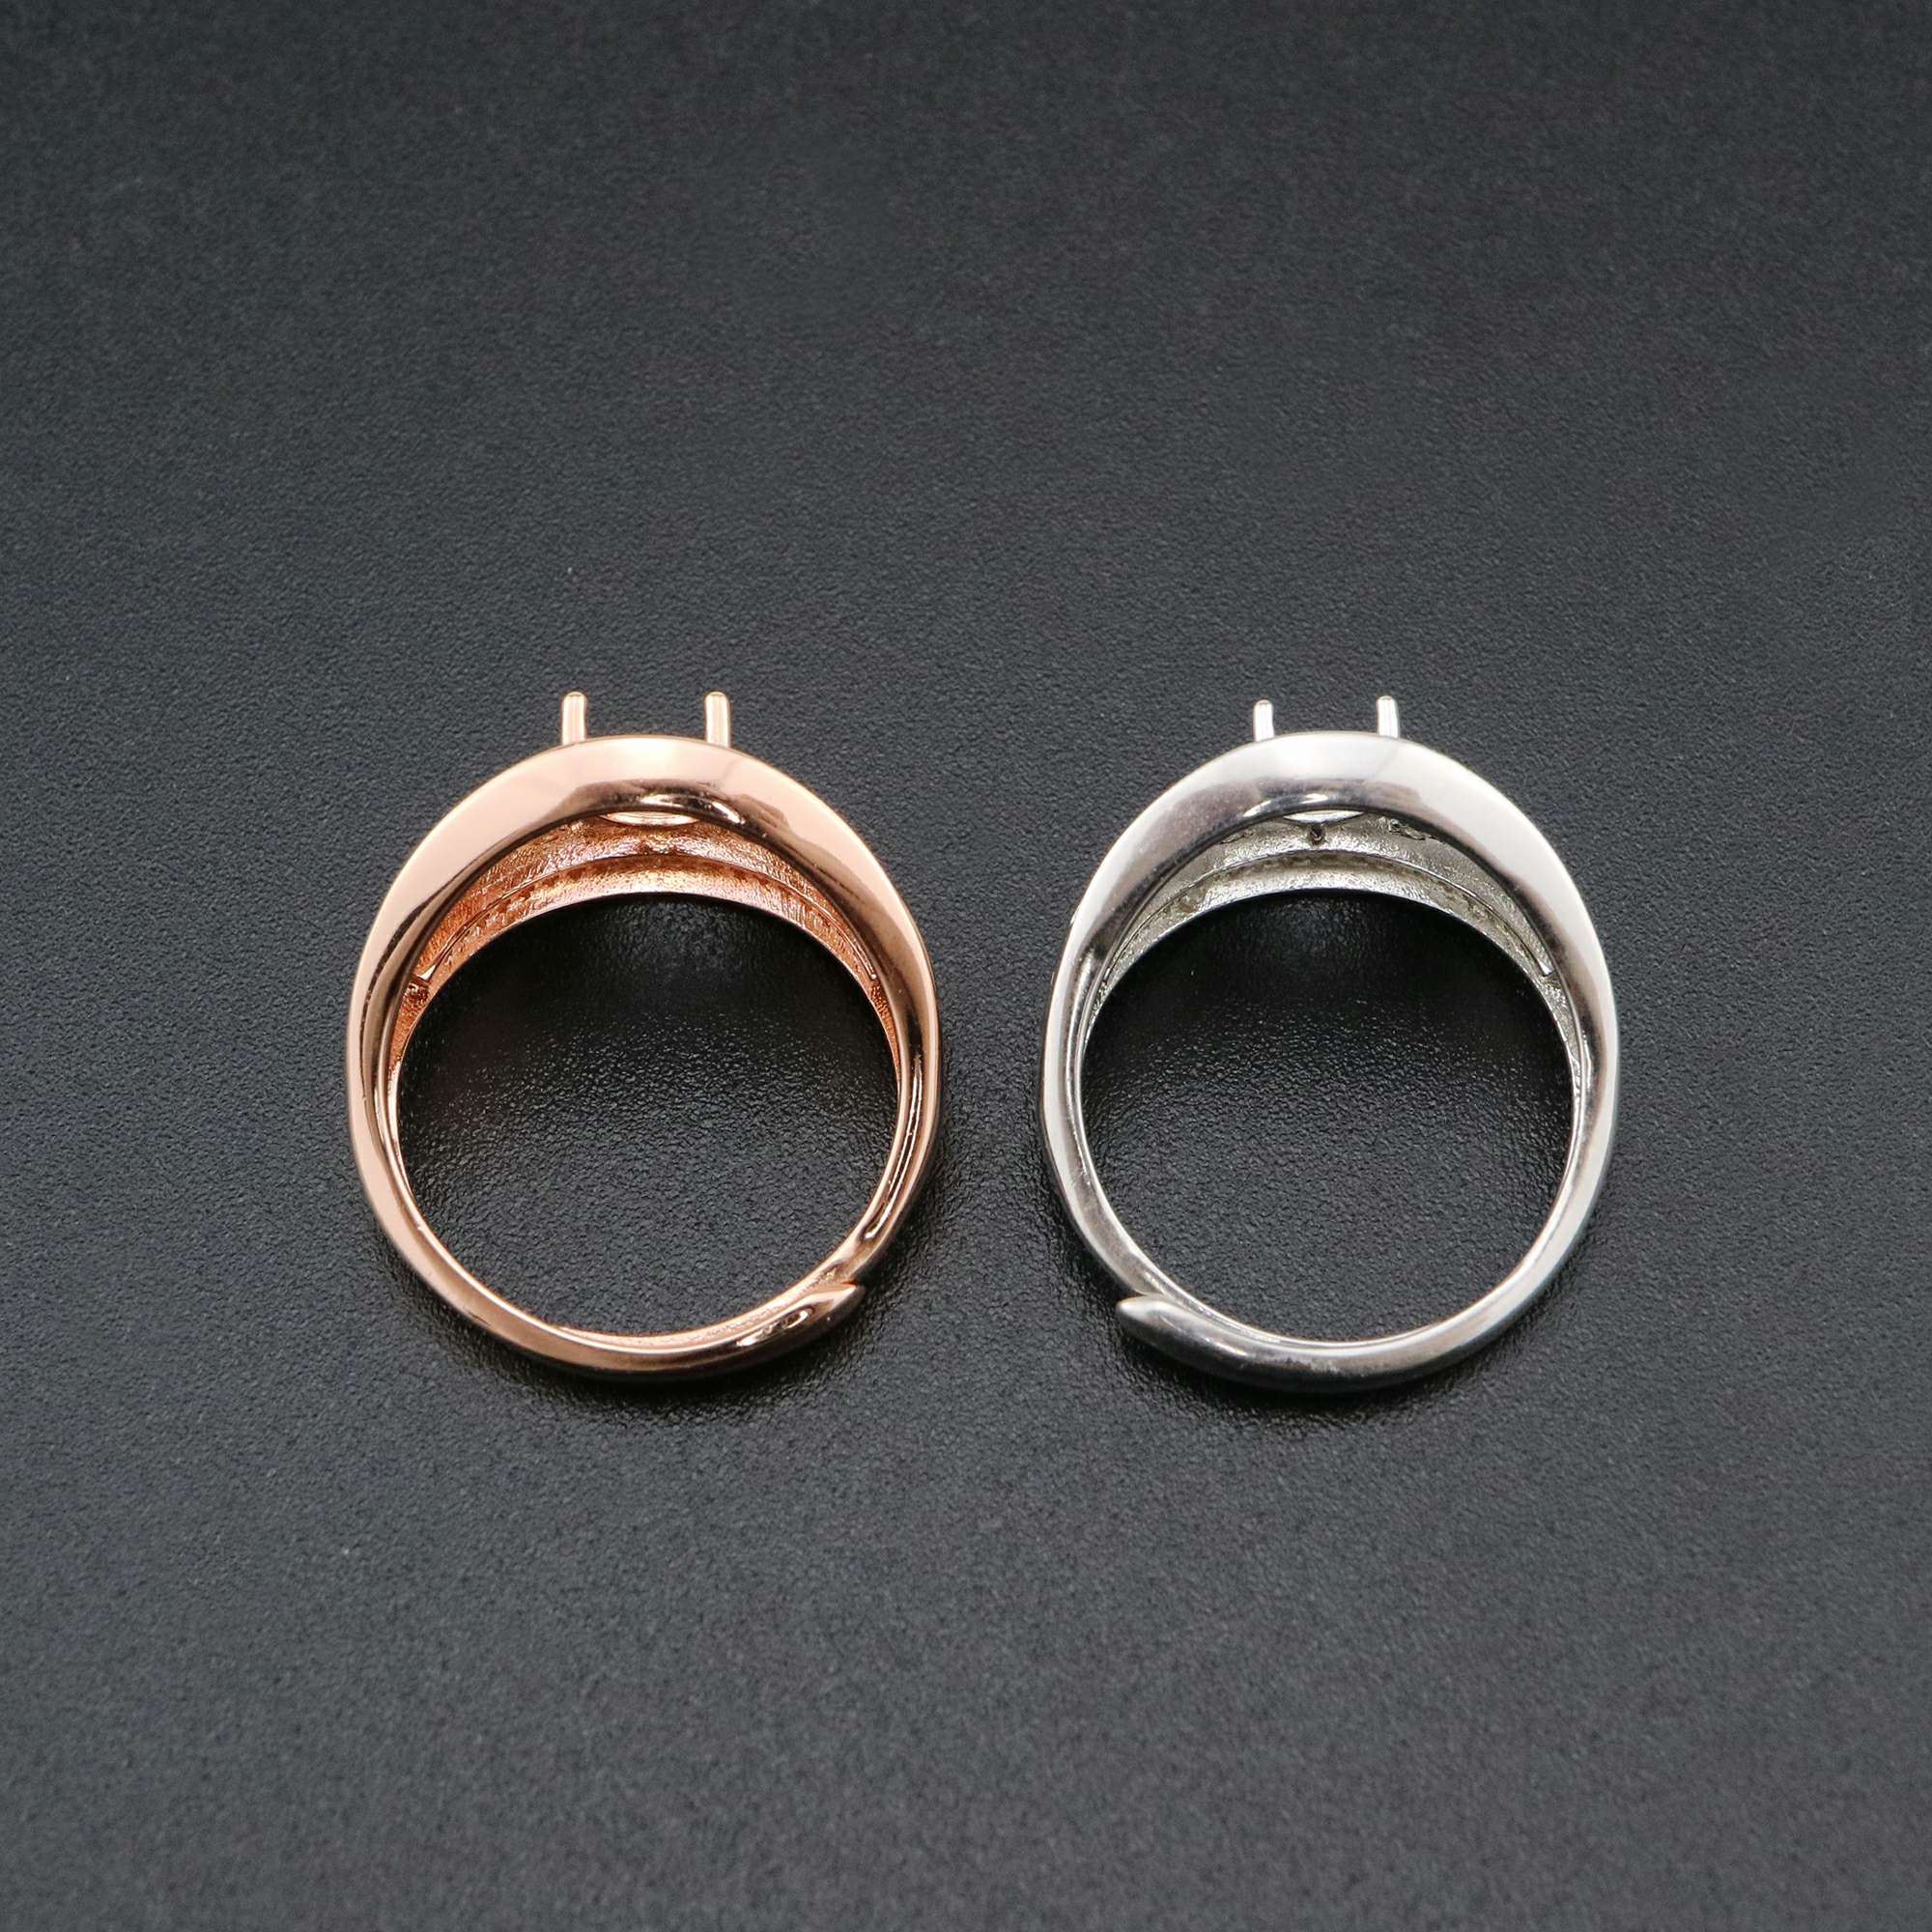 1Pcs Oval Bezel Vinatge Style Rose Gold Plated Solid 925 Sterling Silver Adjustable Prong Ring Settings Blank for Gemstone 1224037 - Click Image to Close